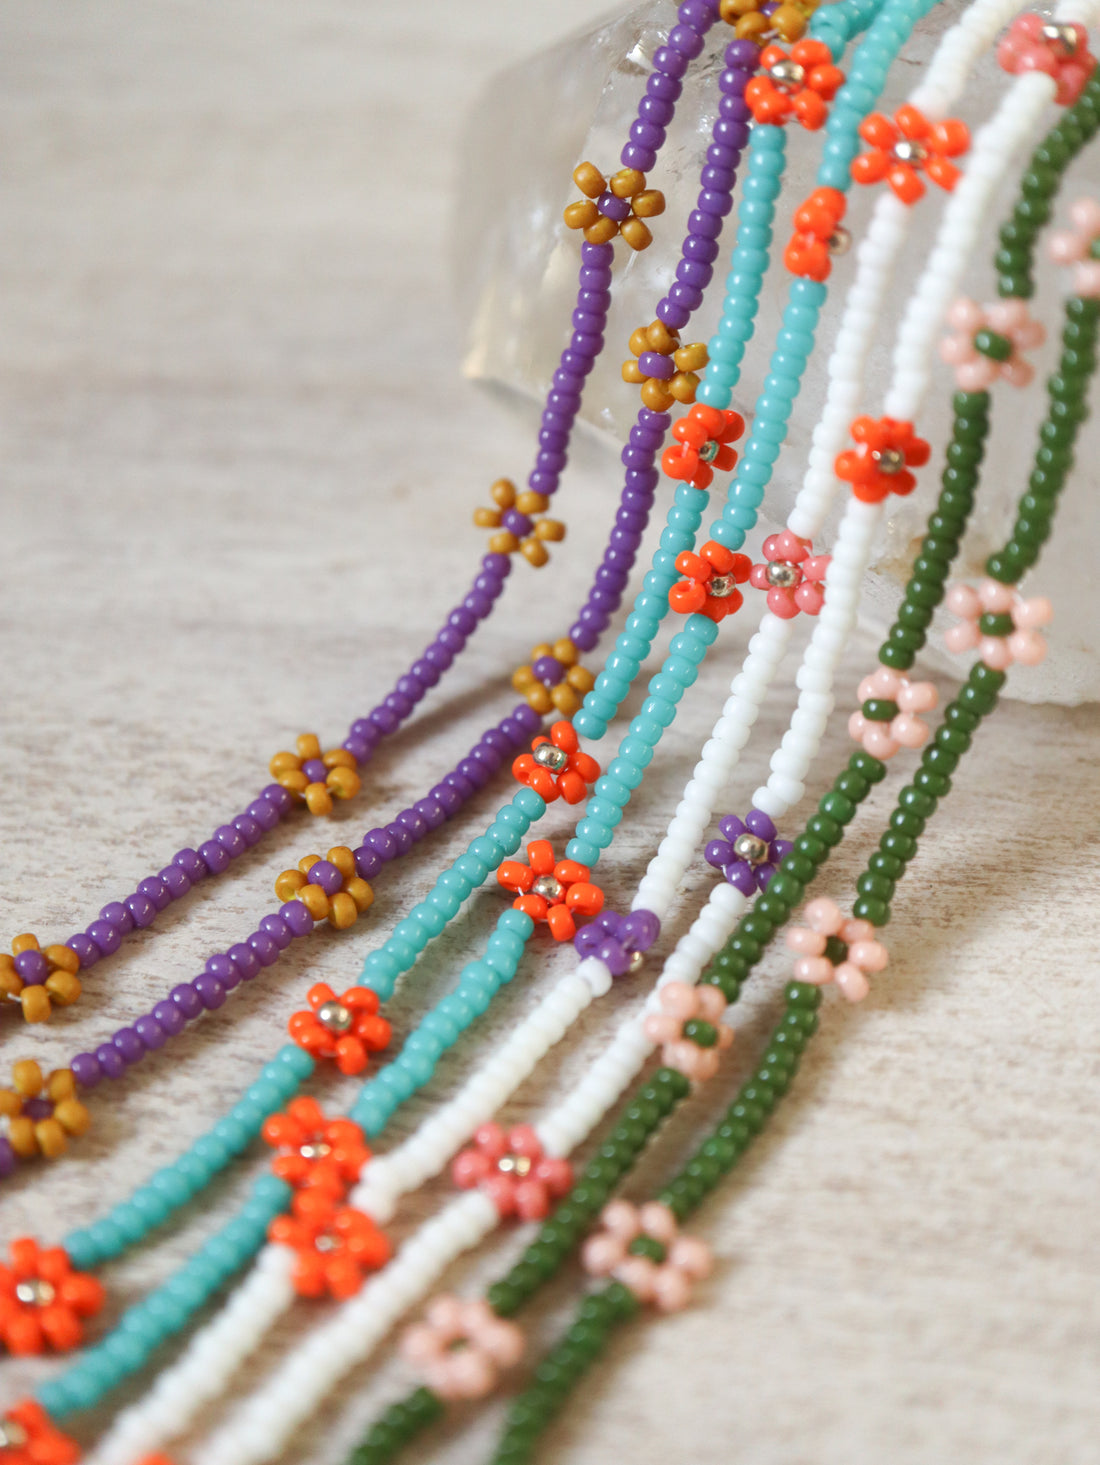 Get Started Beading Today With This Easy Daisy Chain Necklace Tutorial